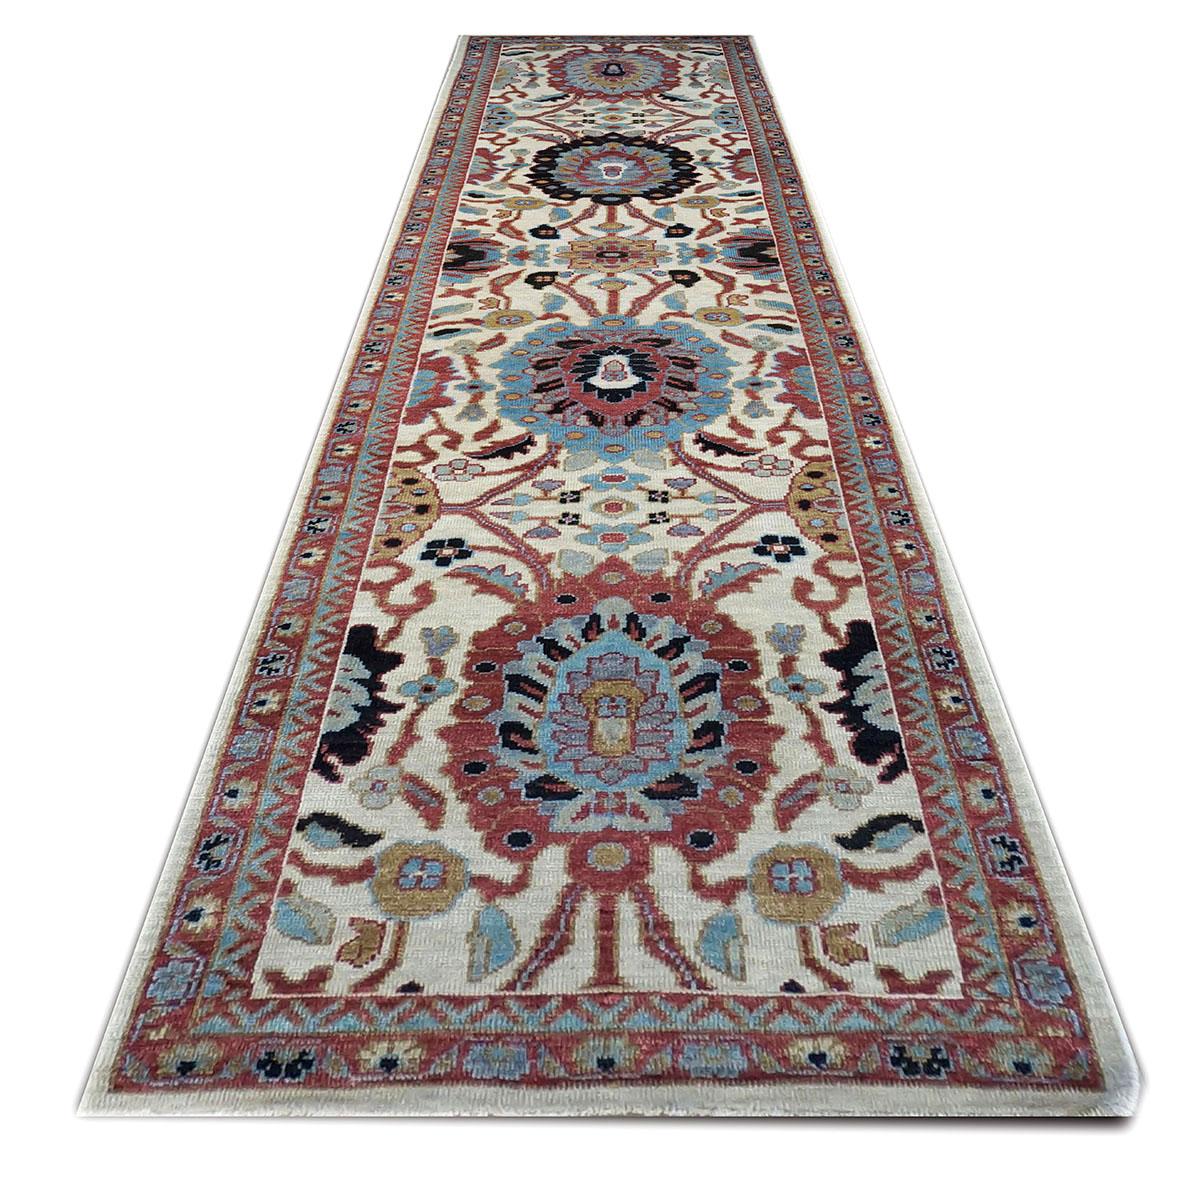 Ashly Fine Rugs presents an antique recreation of an original Persian Sultanabad hall runner. Part of our own previous production, this antique recreation was thought of and created in-house and 100% handmade in Afghanistan by master weavers.